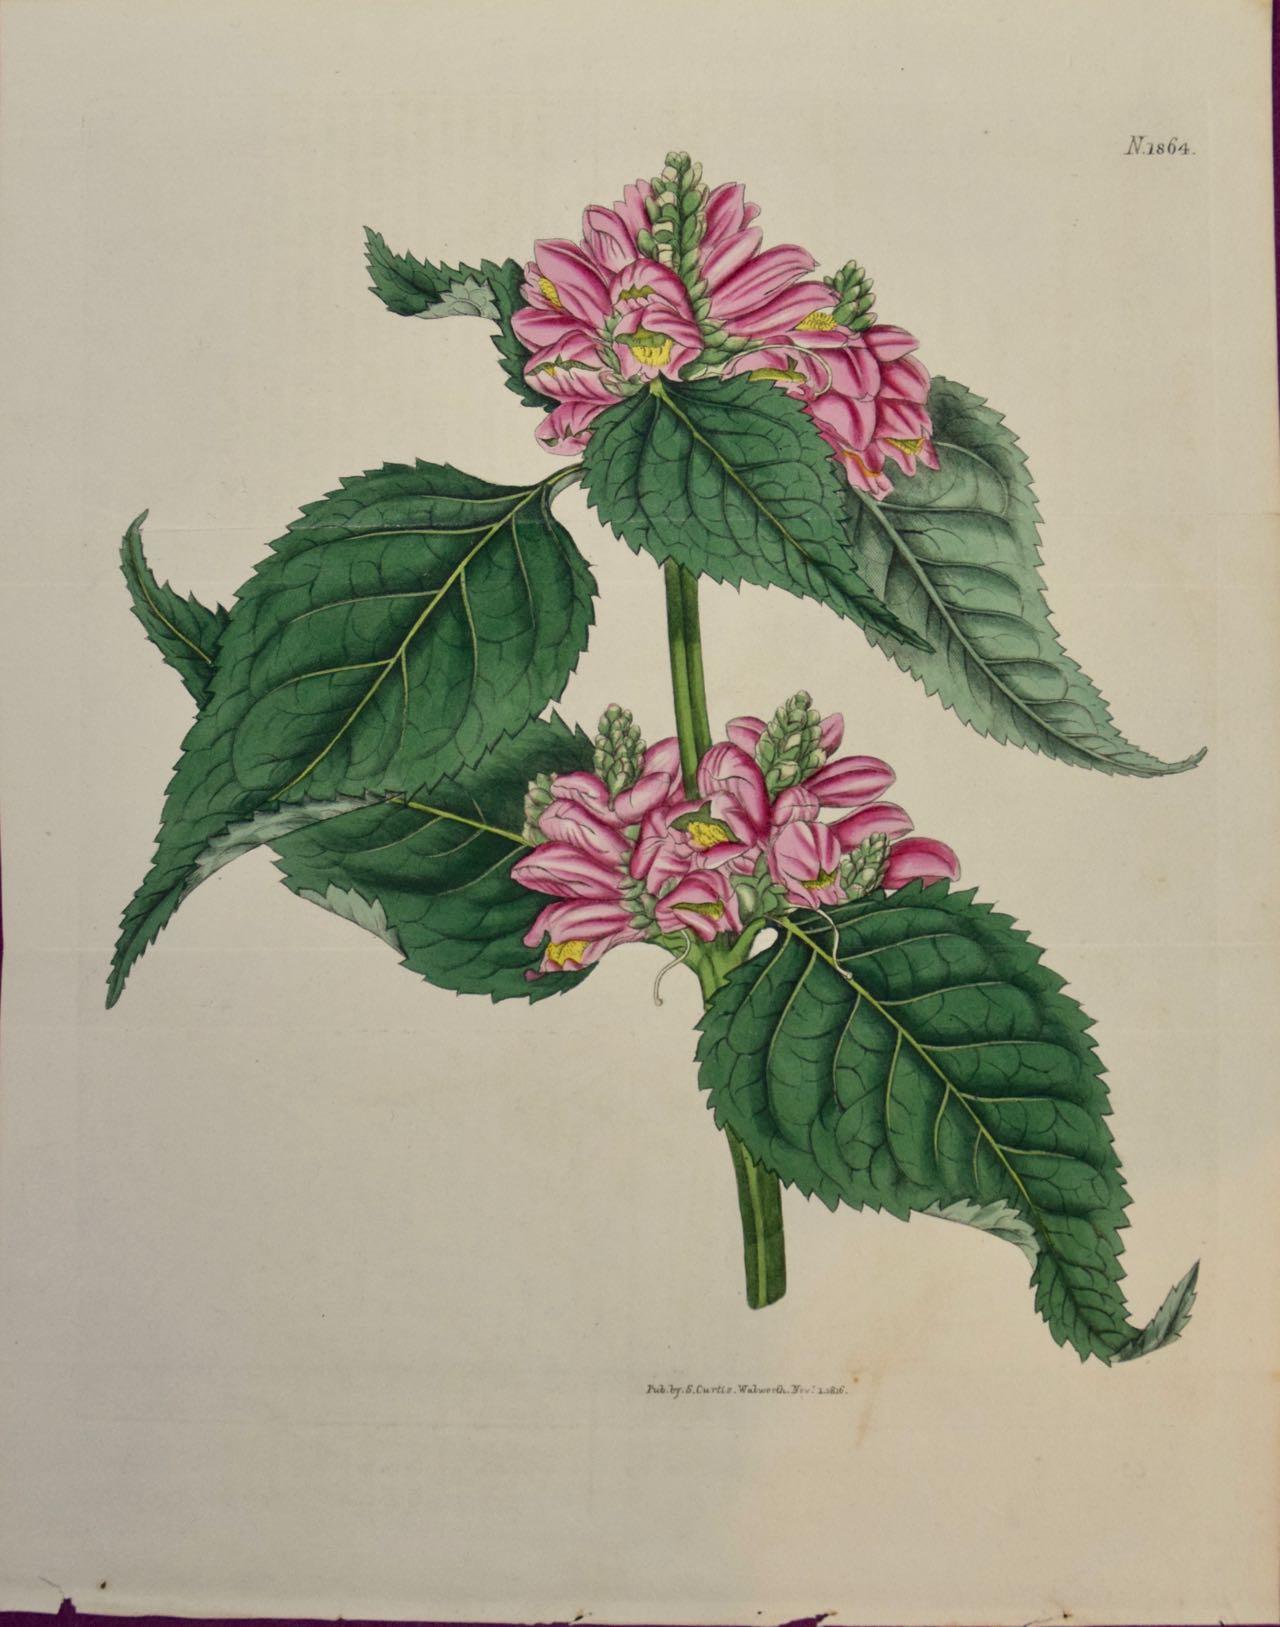 Flowering Lyons' Chelone Botanical: A 19th C. Hand-colored Engraving by Curtis